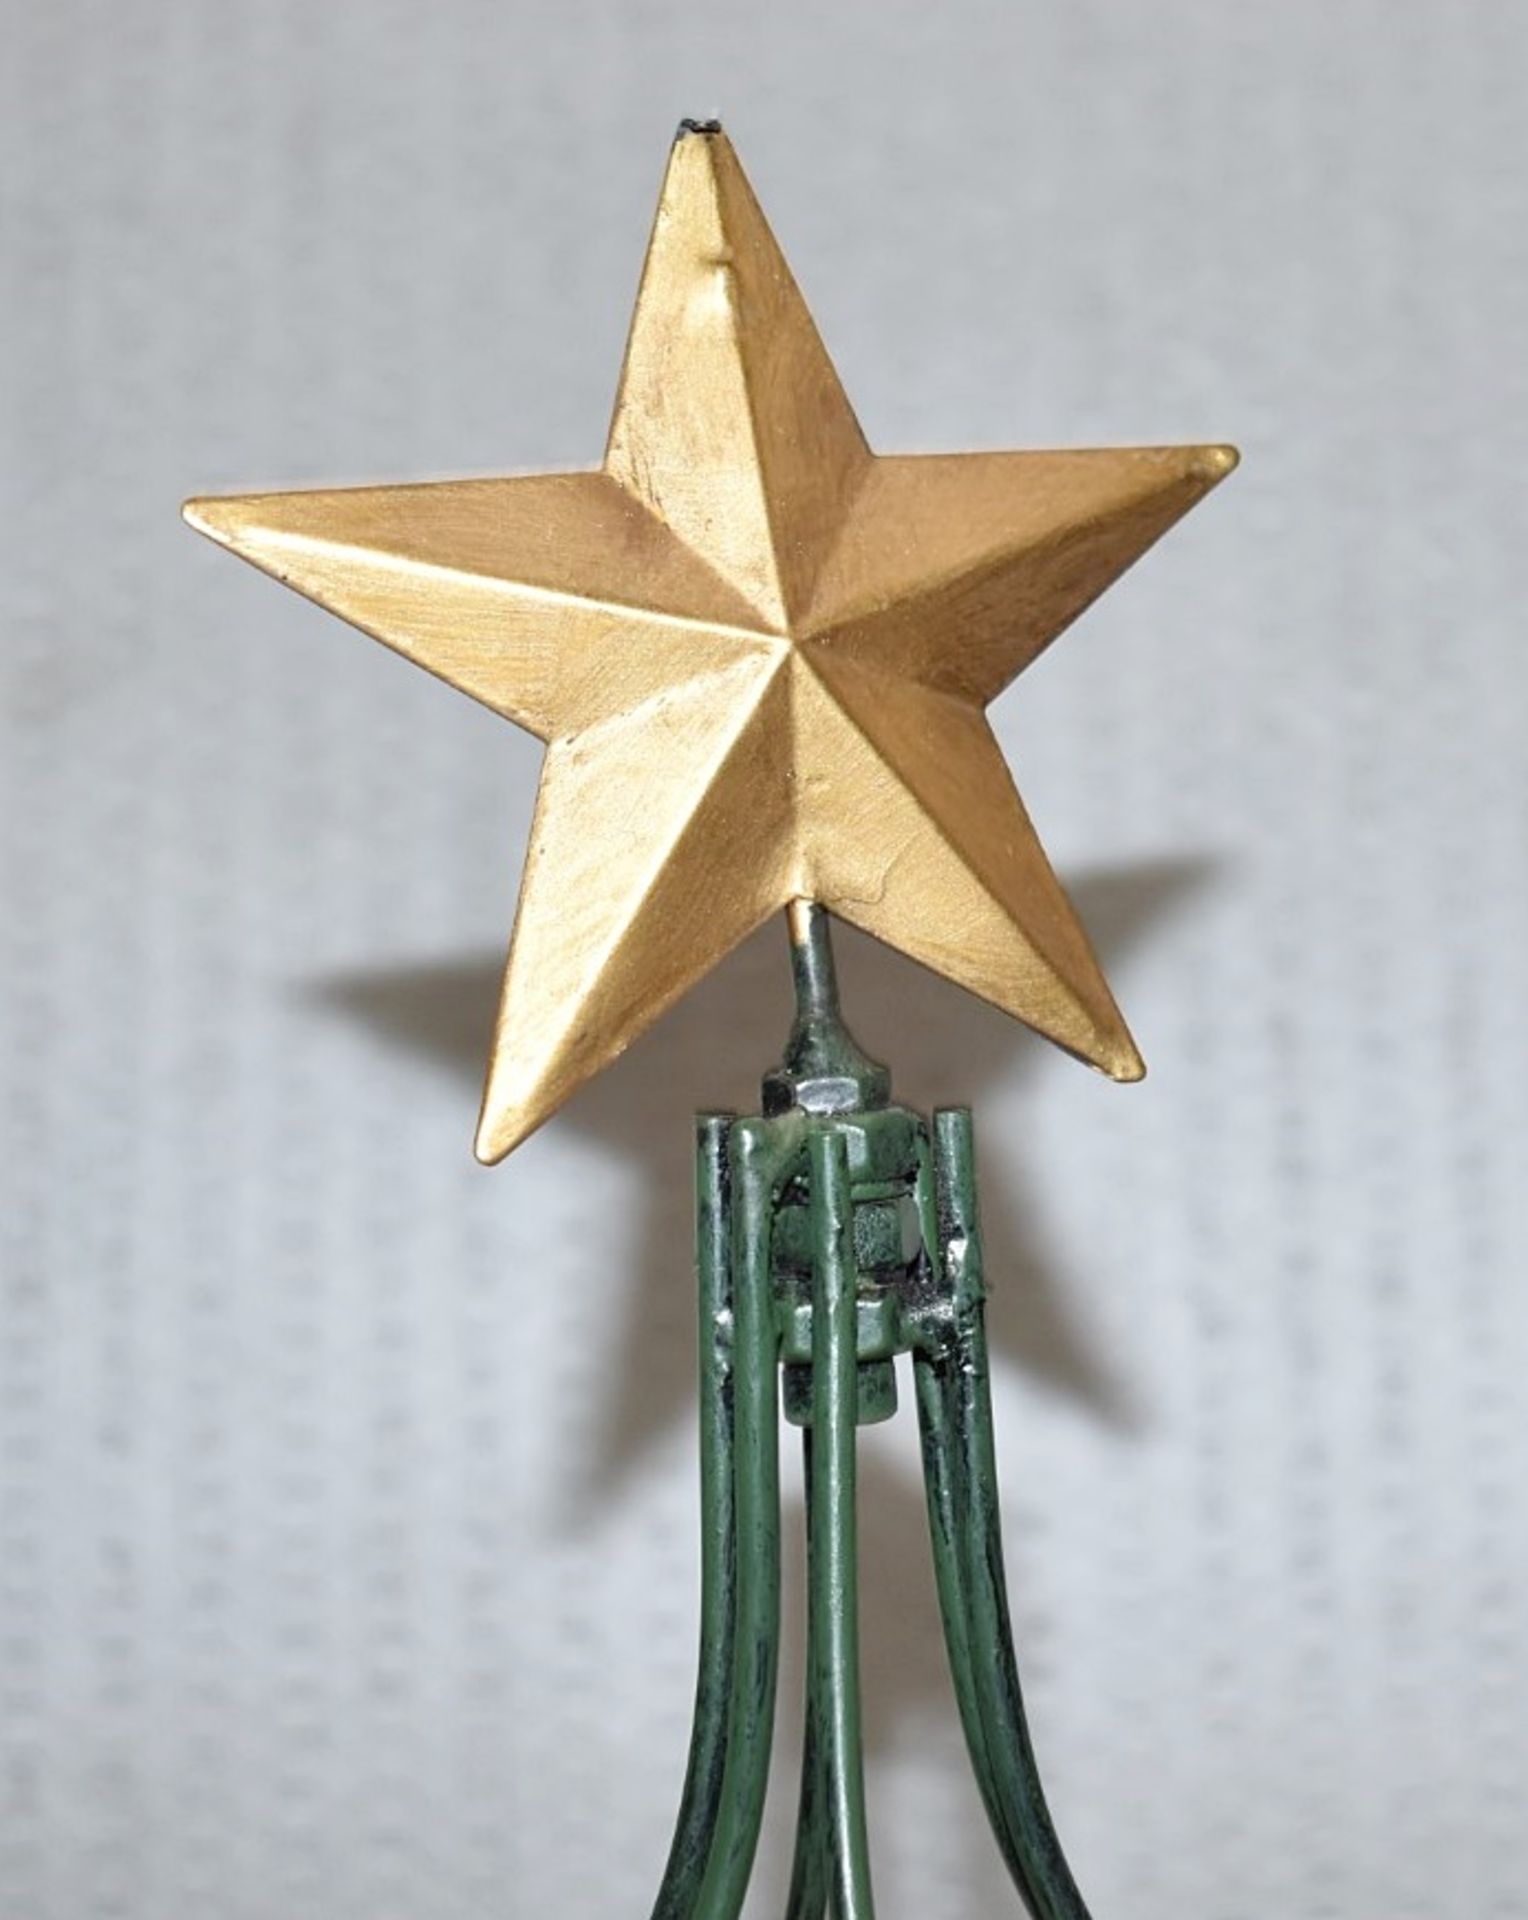 1 x SHISHI Decorative Star-topped Metal Christmas Tree (94cm) - Original Price £145.00 - Unboxed - Image 3 of 6